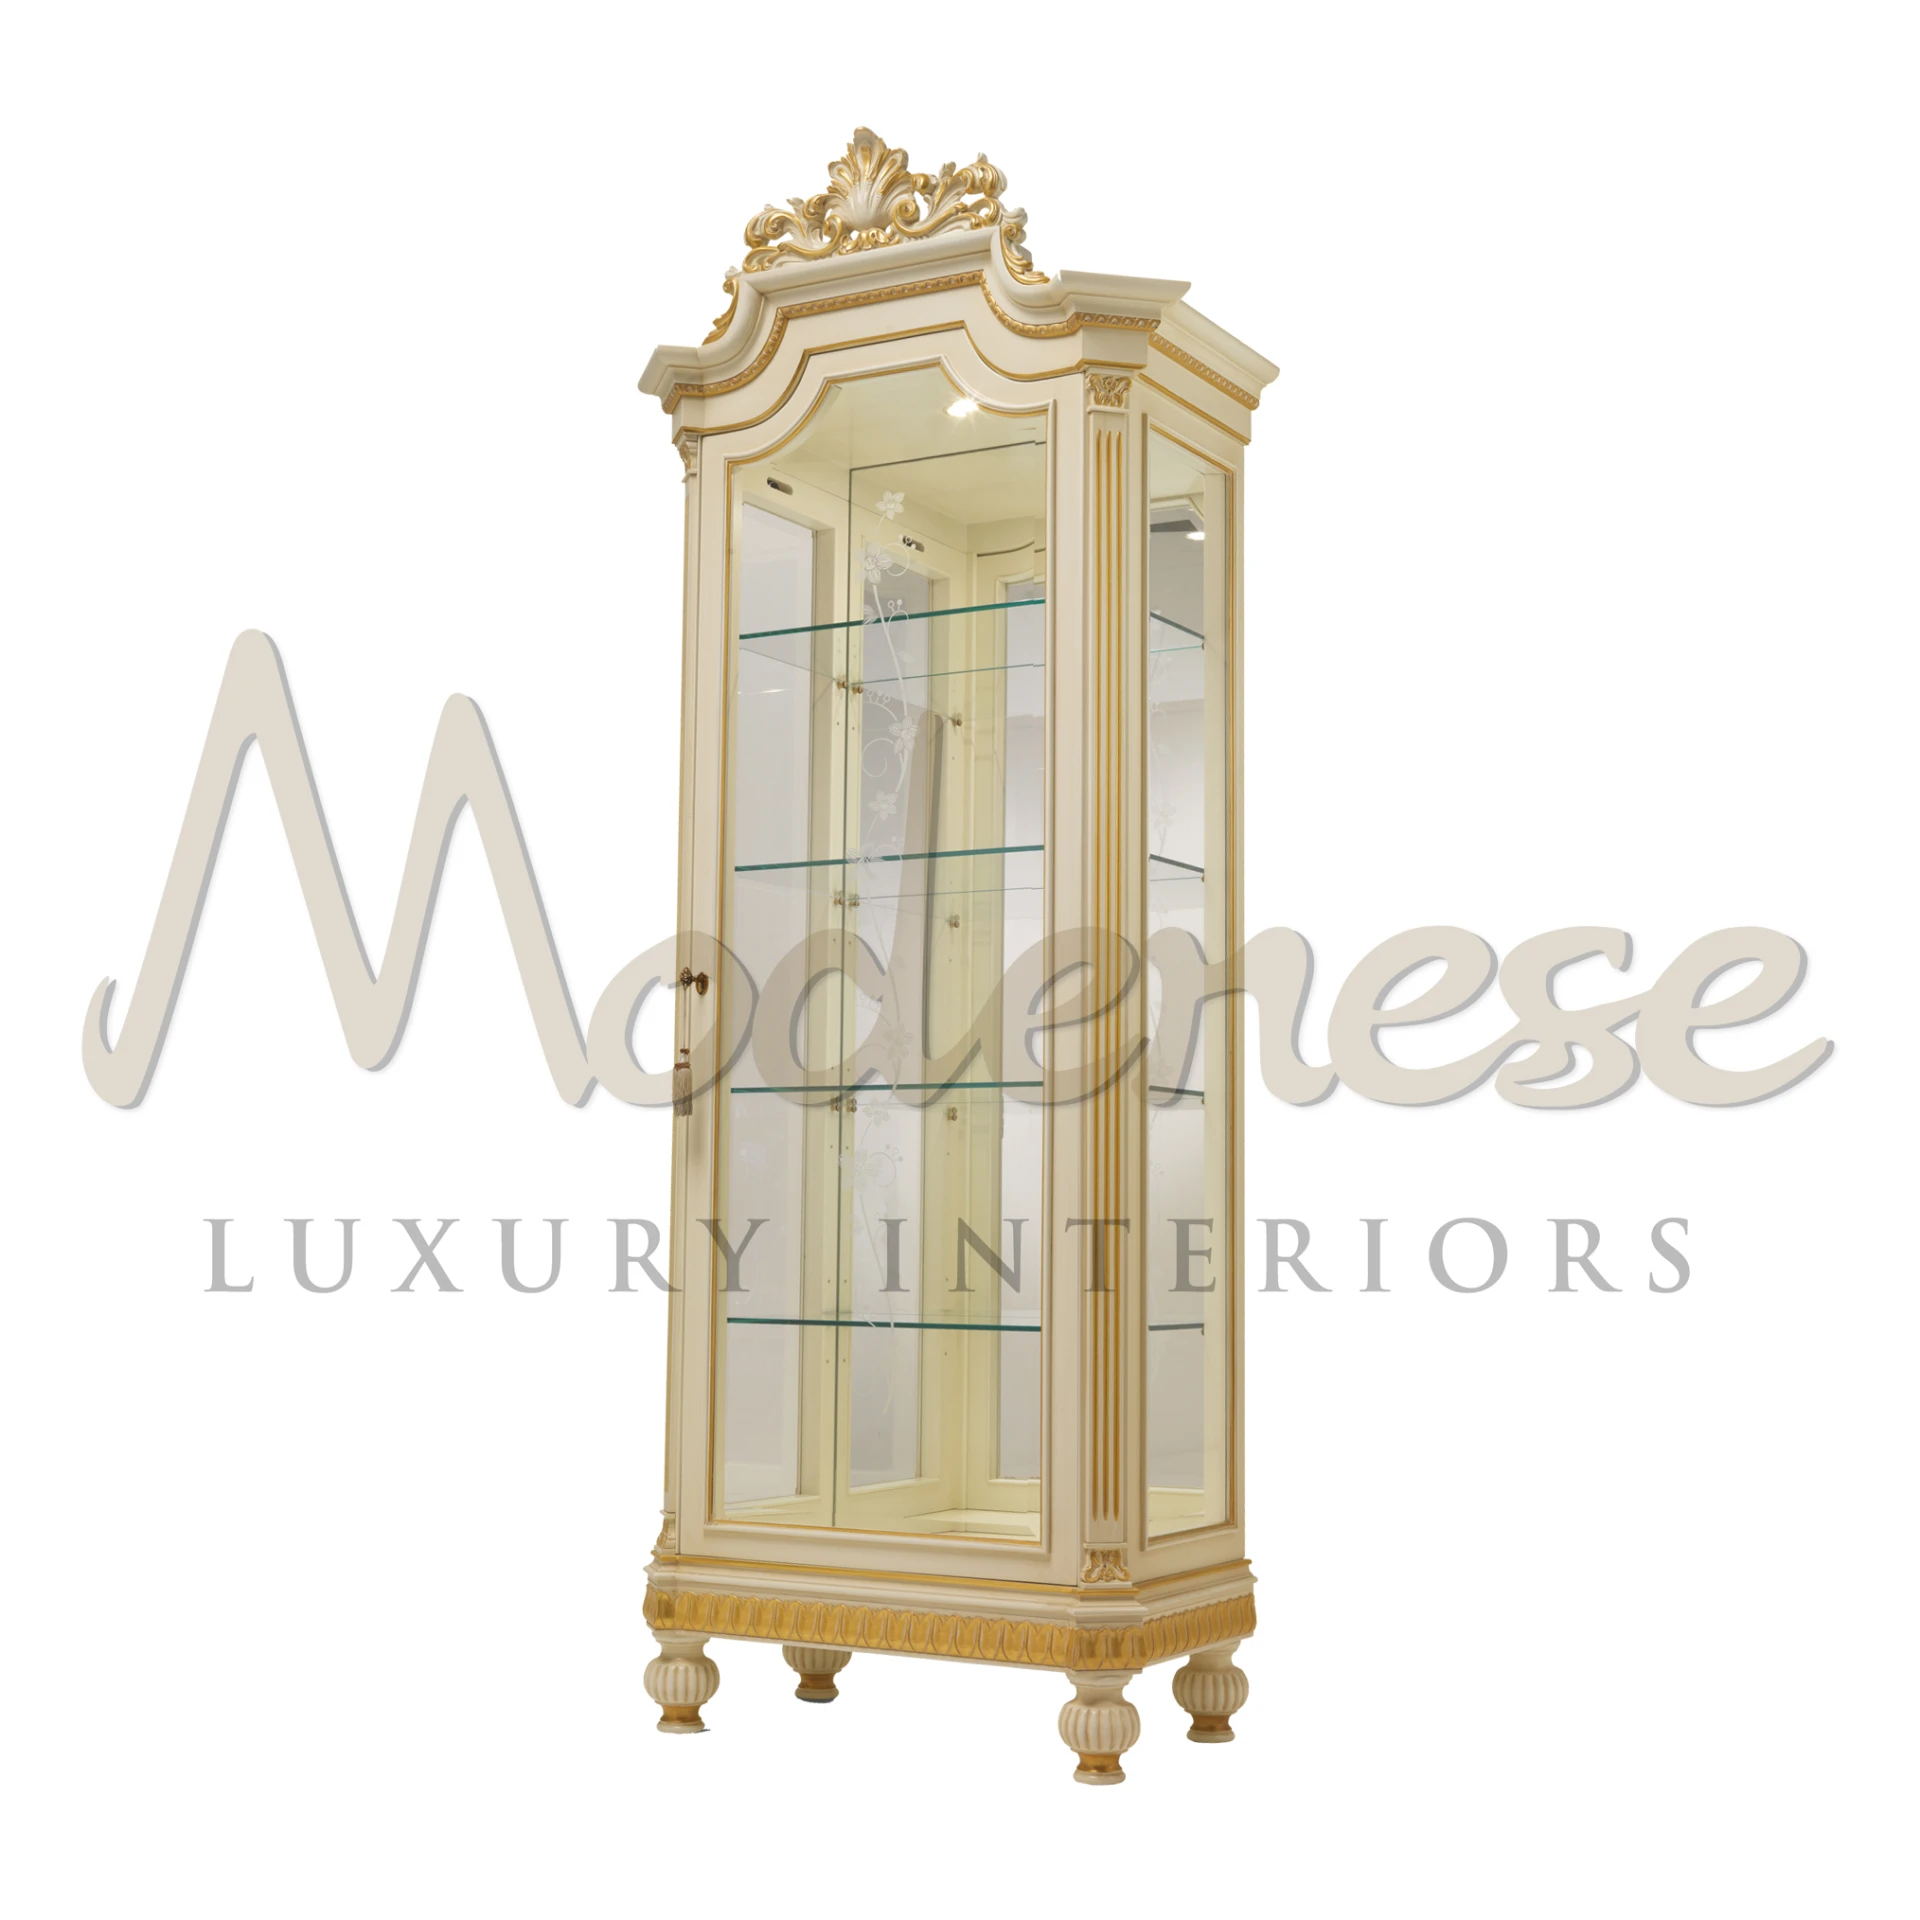 Stylish Empire one door glass vitrine with complex ivory and gold design